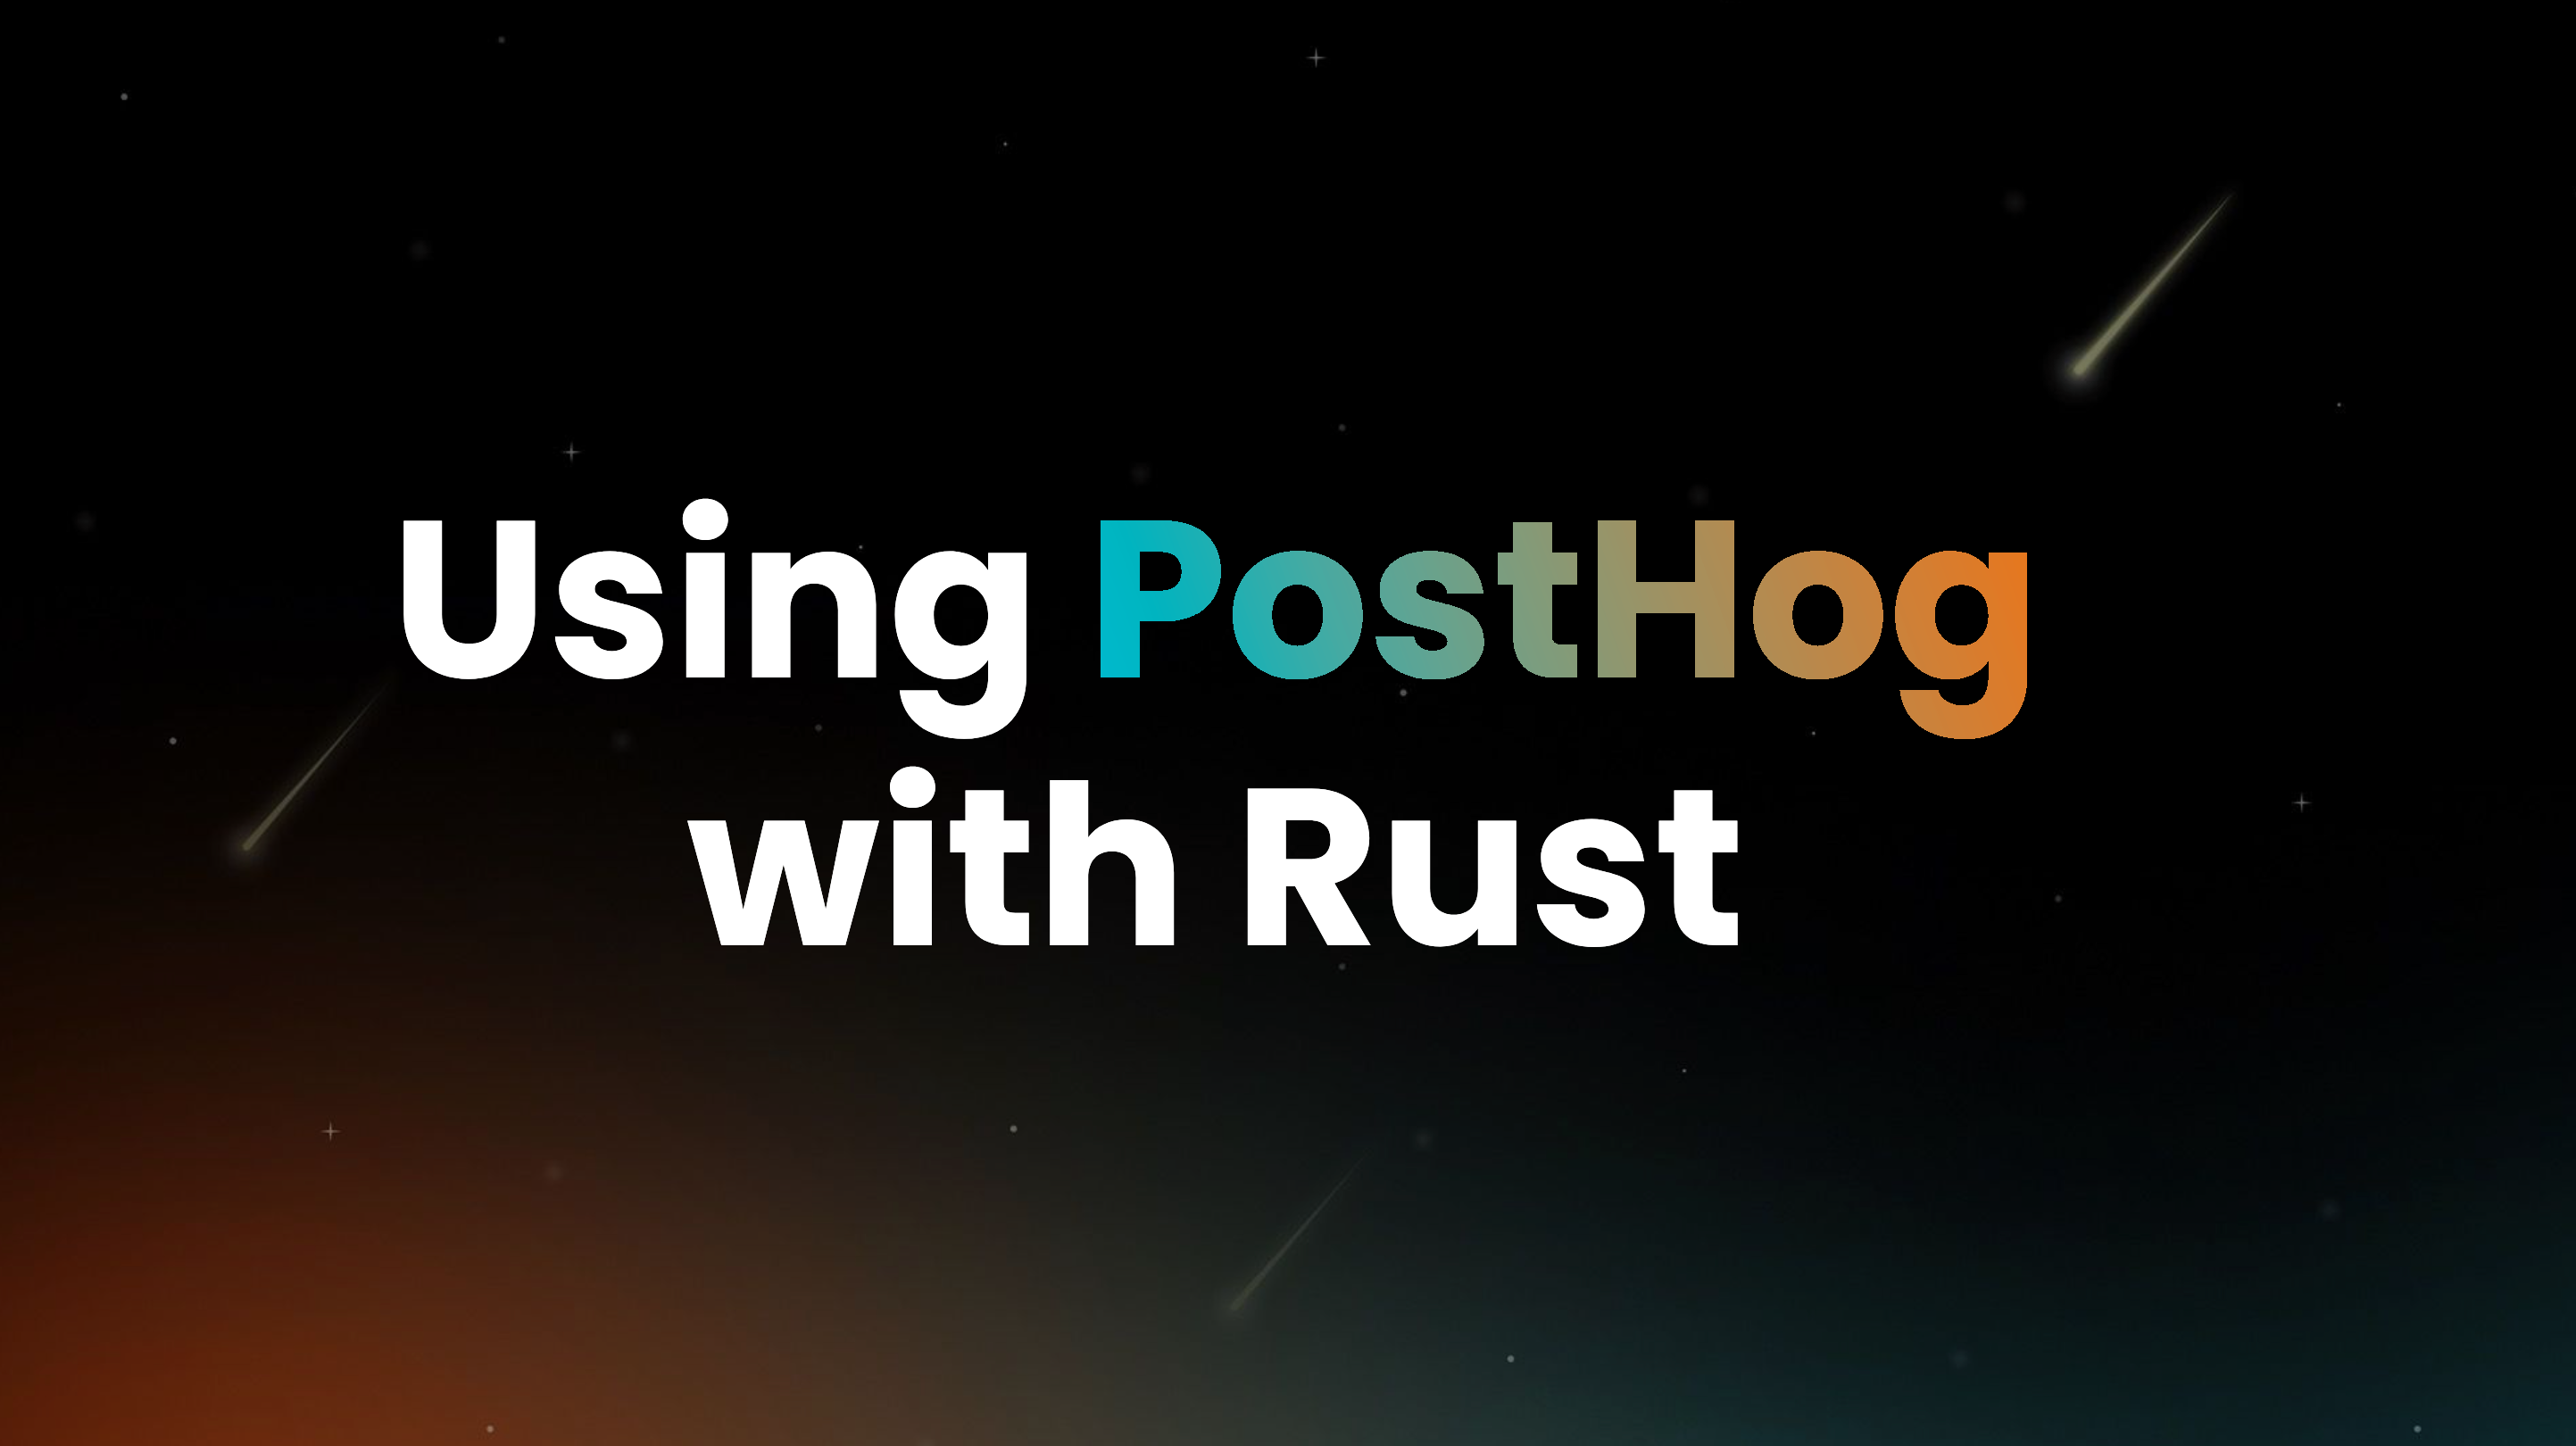 Using PostHog with Rust